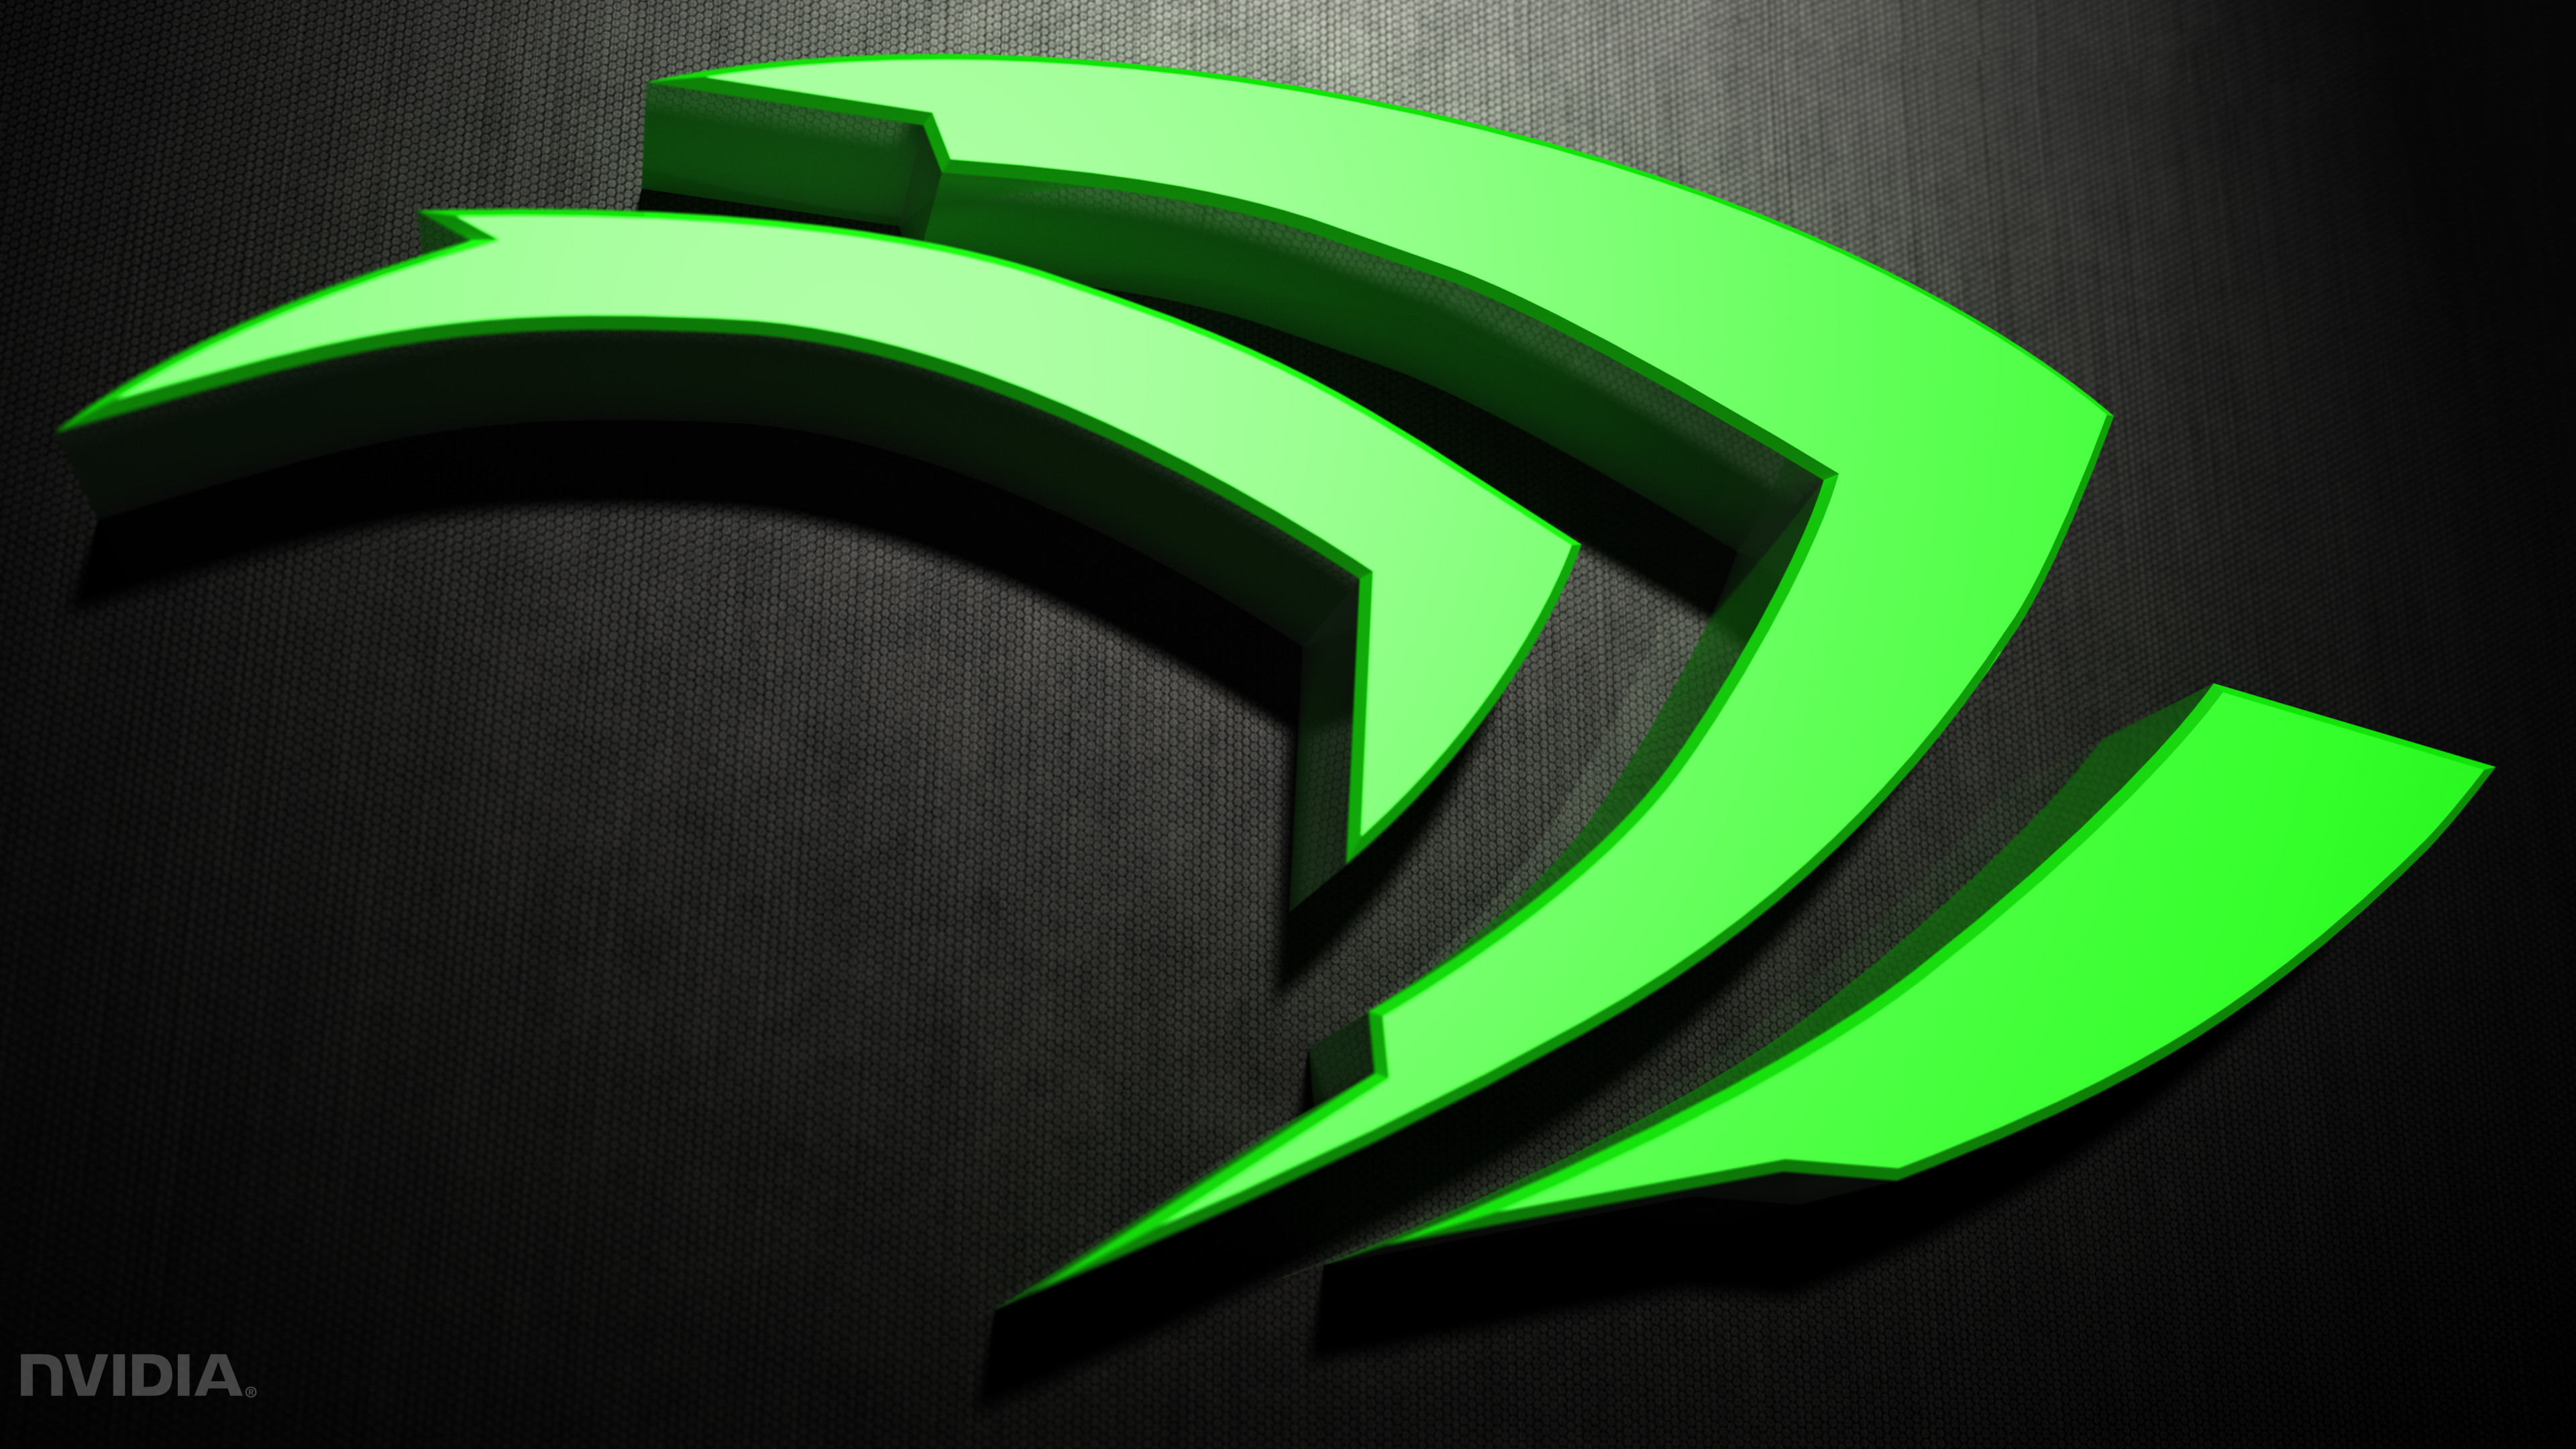 3840x2160 67 Nvidia HD Wallpapers | Backgrounds